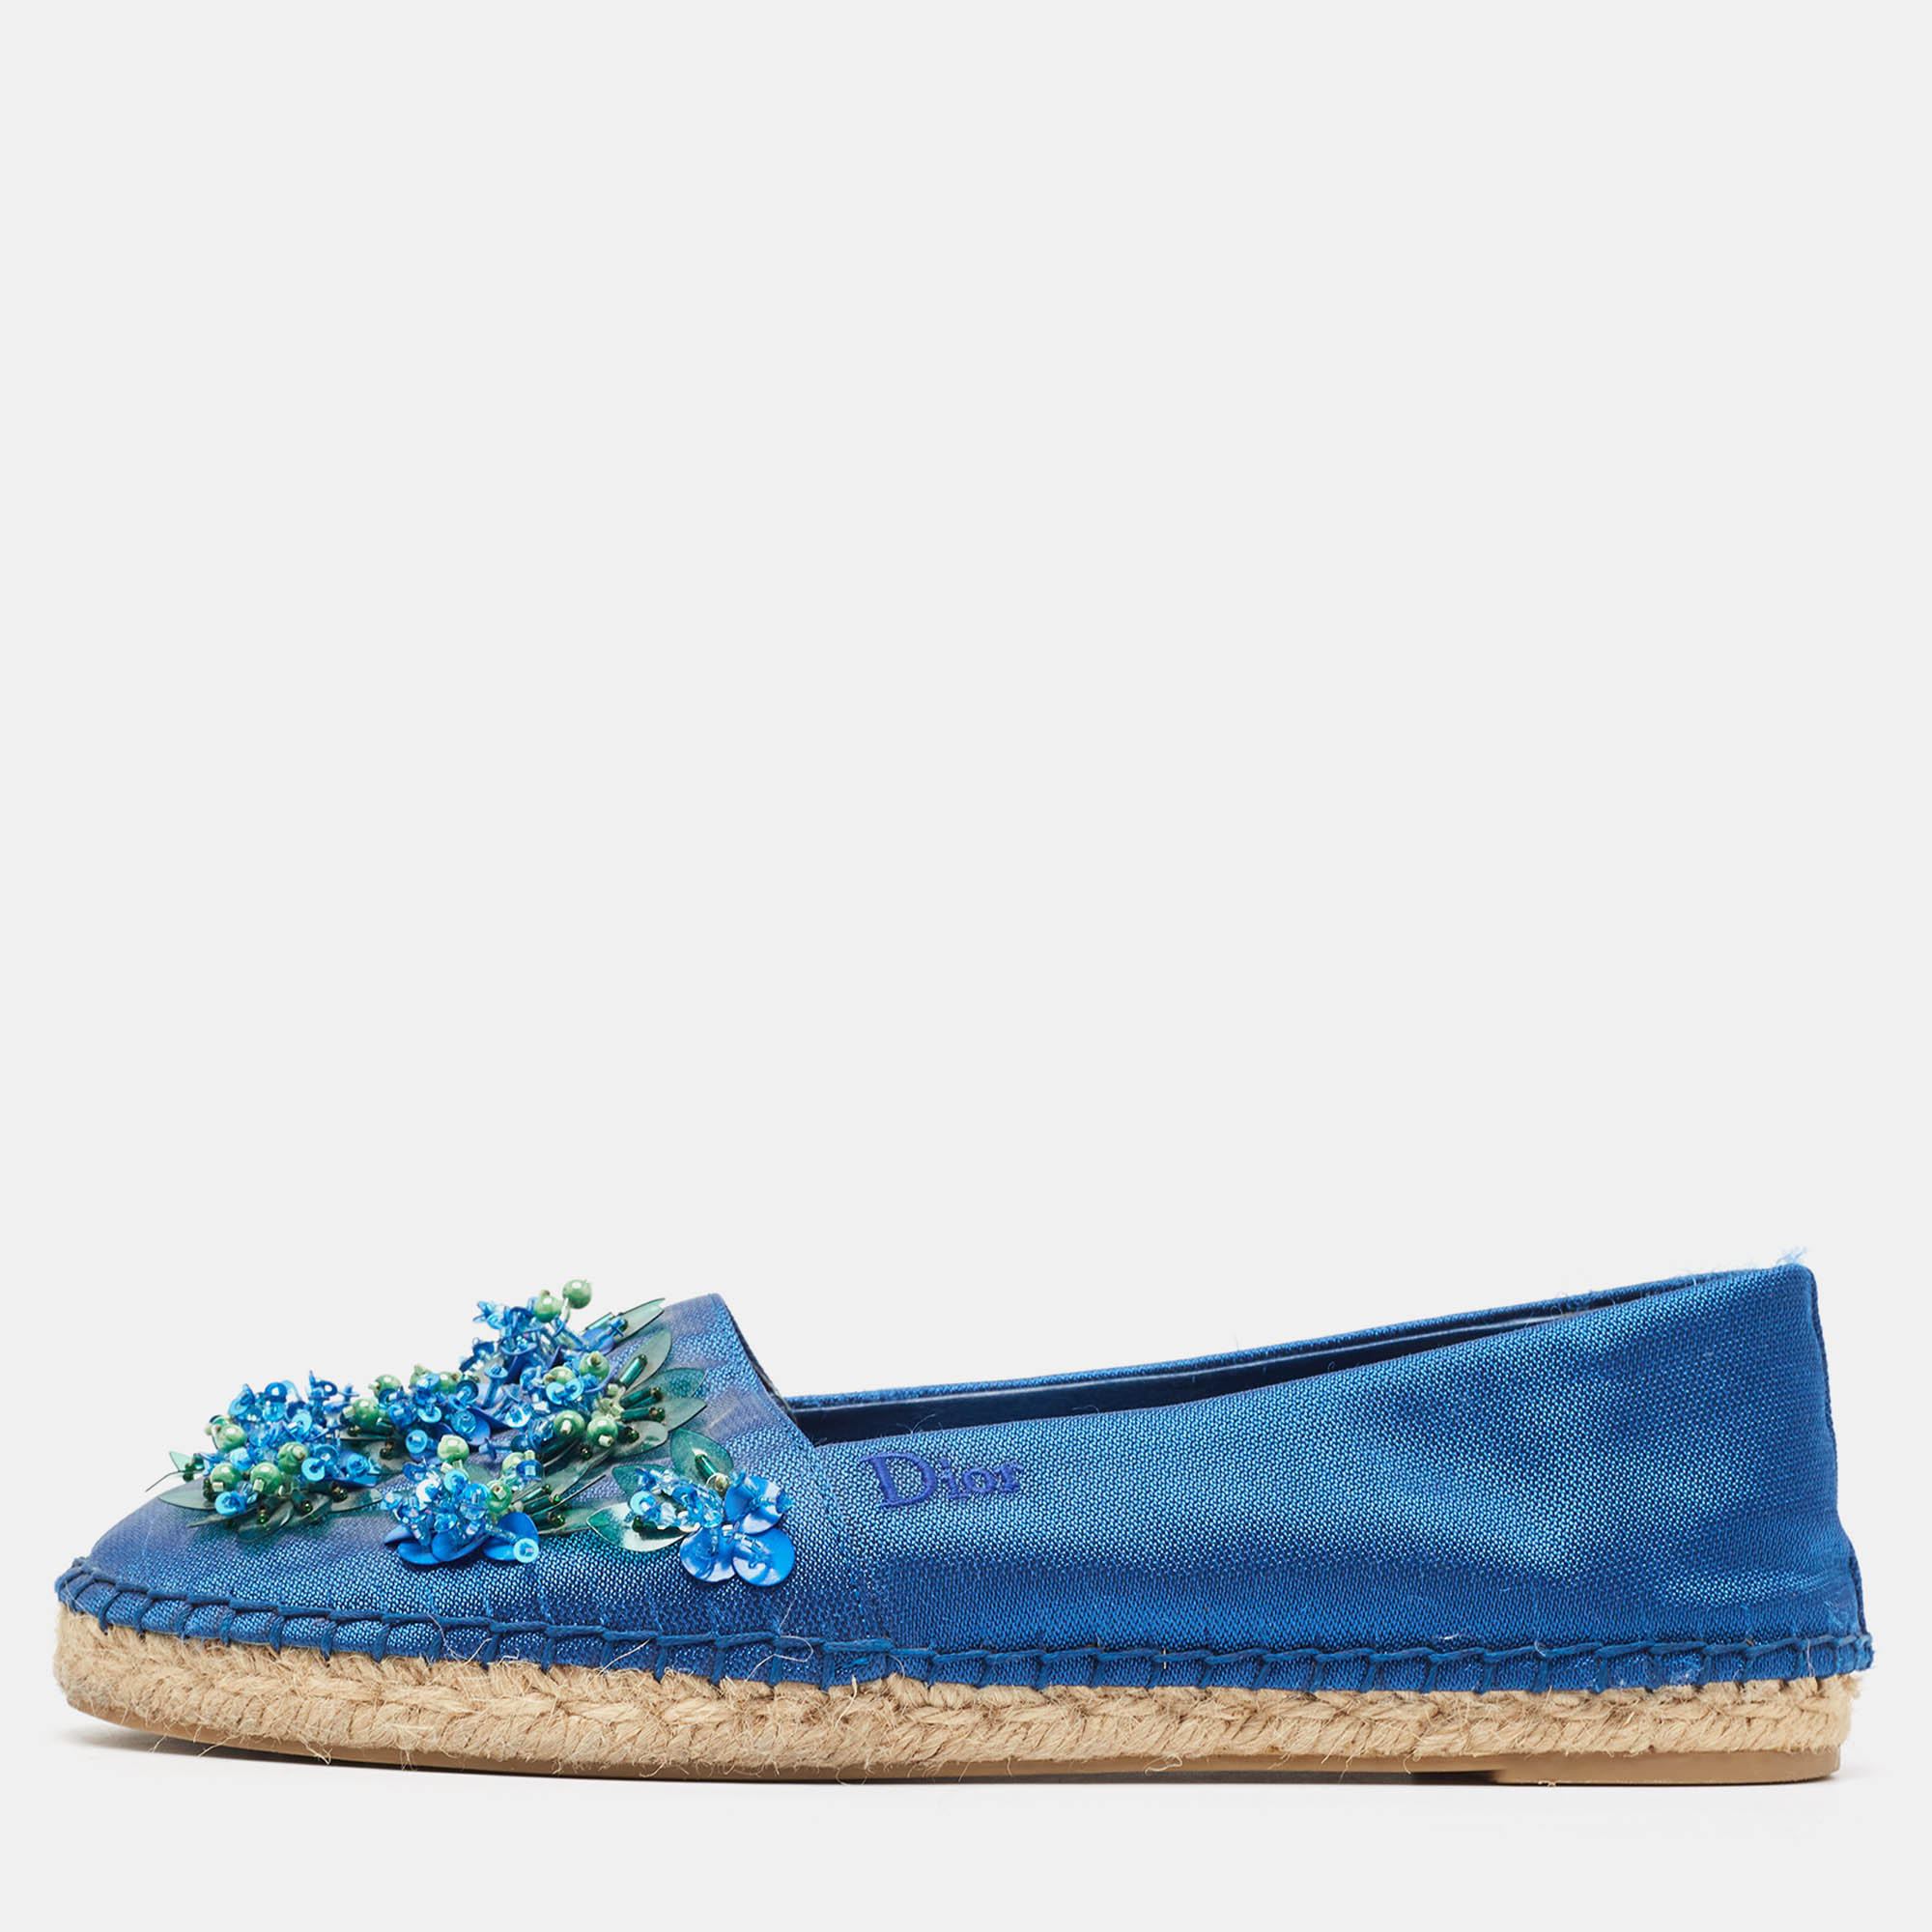 Pre-owned Dior Blue Canvas Crystal Embellished Fusion Espadrille Flats Size 36